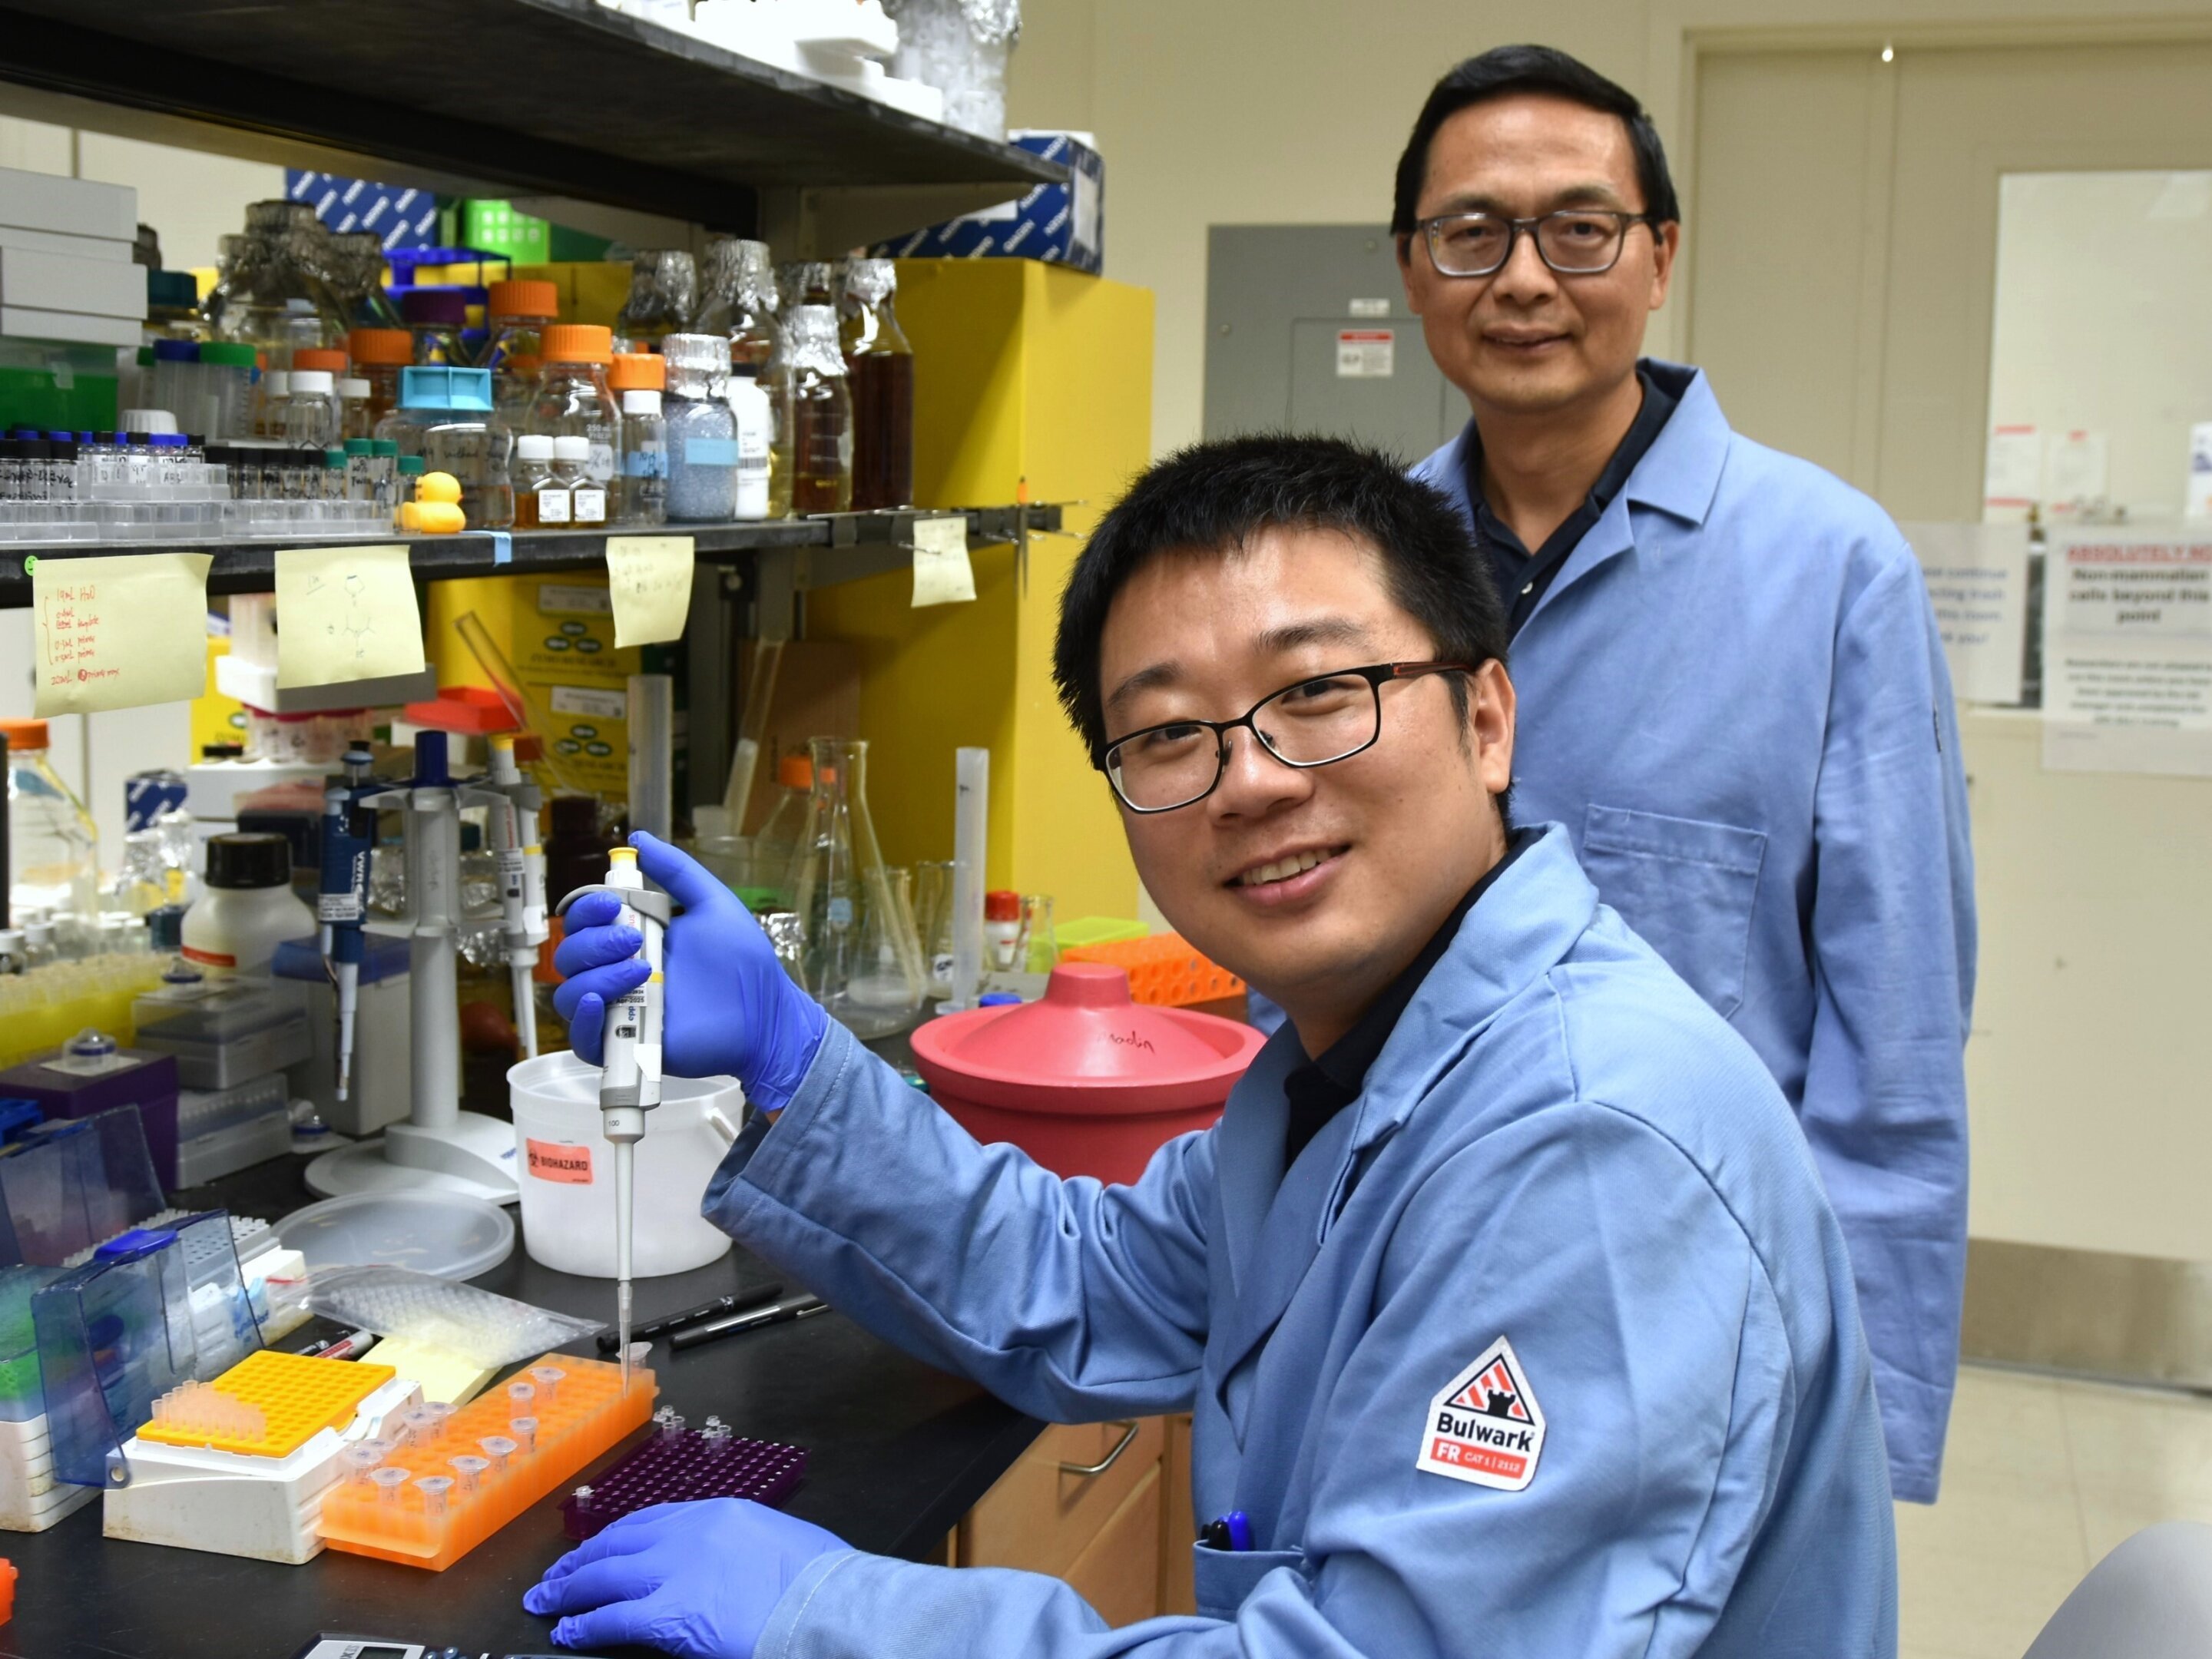 New process uses light and enzymes to create greener chemicals